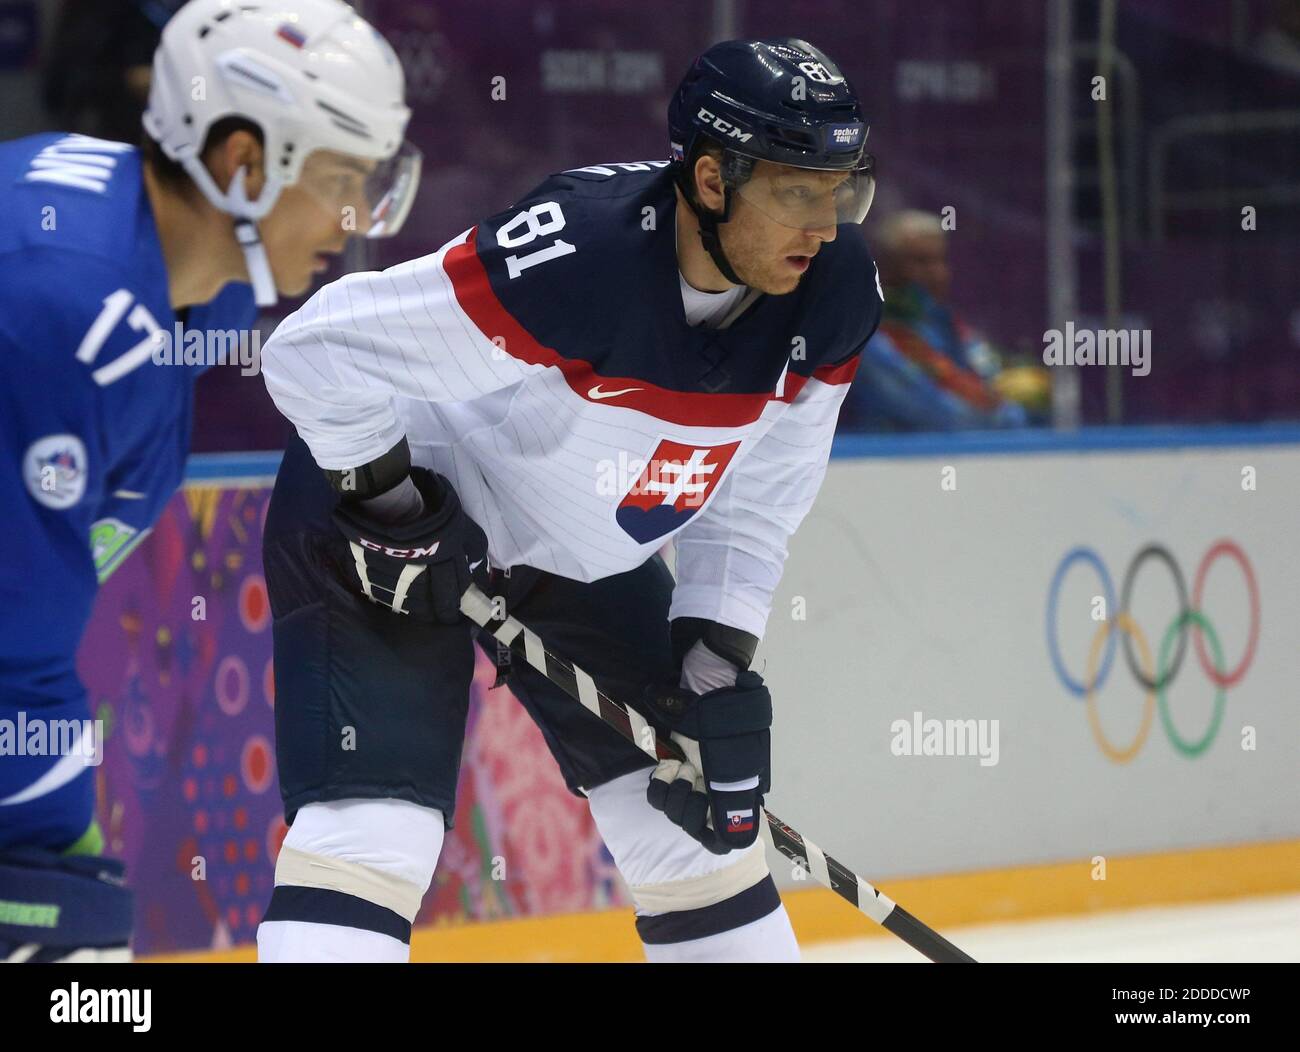 NO FILM, NO VIDEO, NO TV, NO DOCUMENTARY - Slovakia forward Marian Hossa (81) in the first period of a men's hockey game at Bolshoy Ice Dome during the Winter Olympics in Sochi, Russia, Saturday, Feb. 15, 2014. Photo by Brian Cassella/Chicago Tribune/MCT/ABACAPRESS.COM Stock Photo